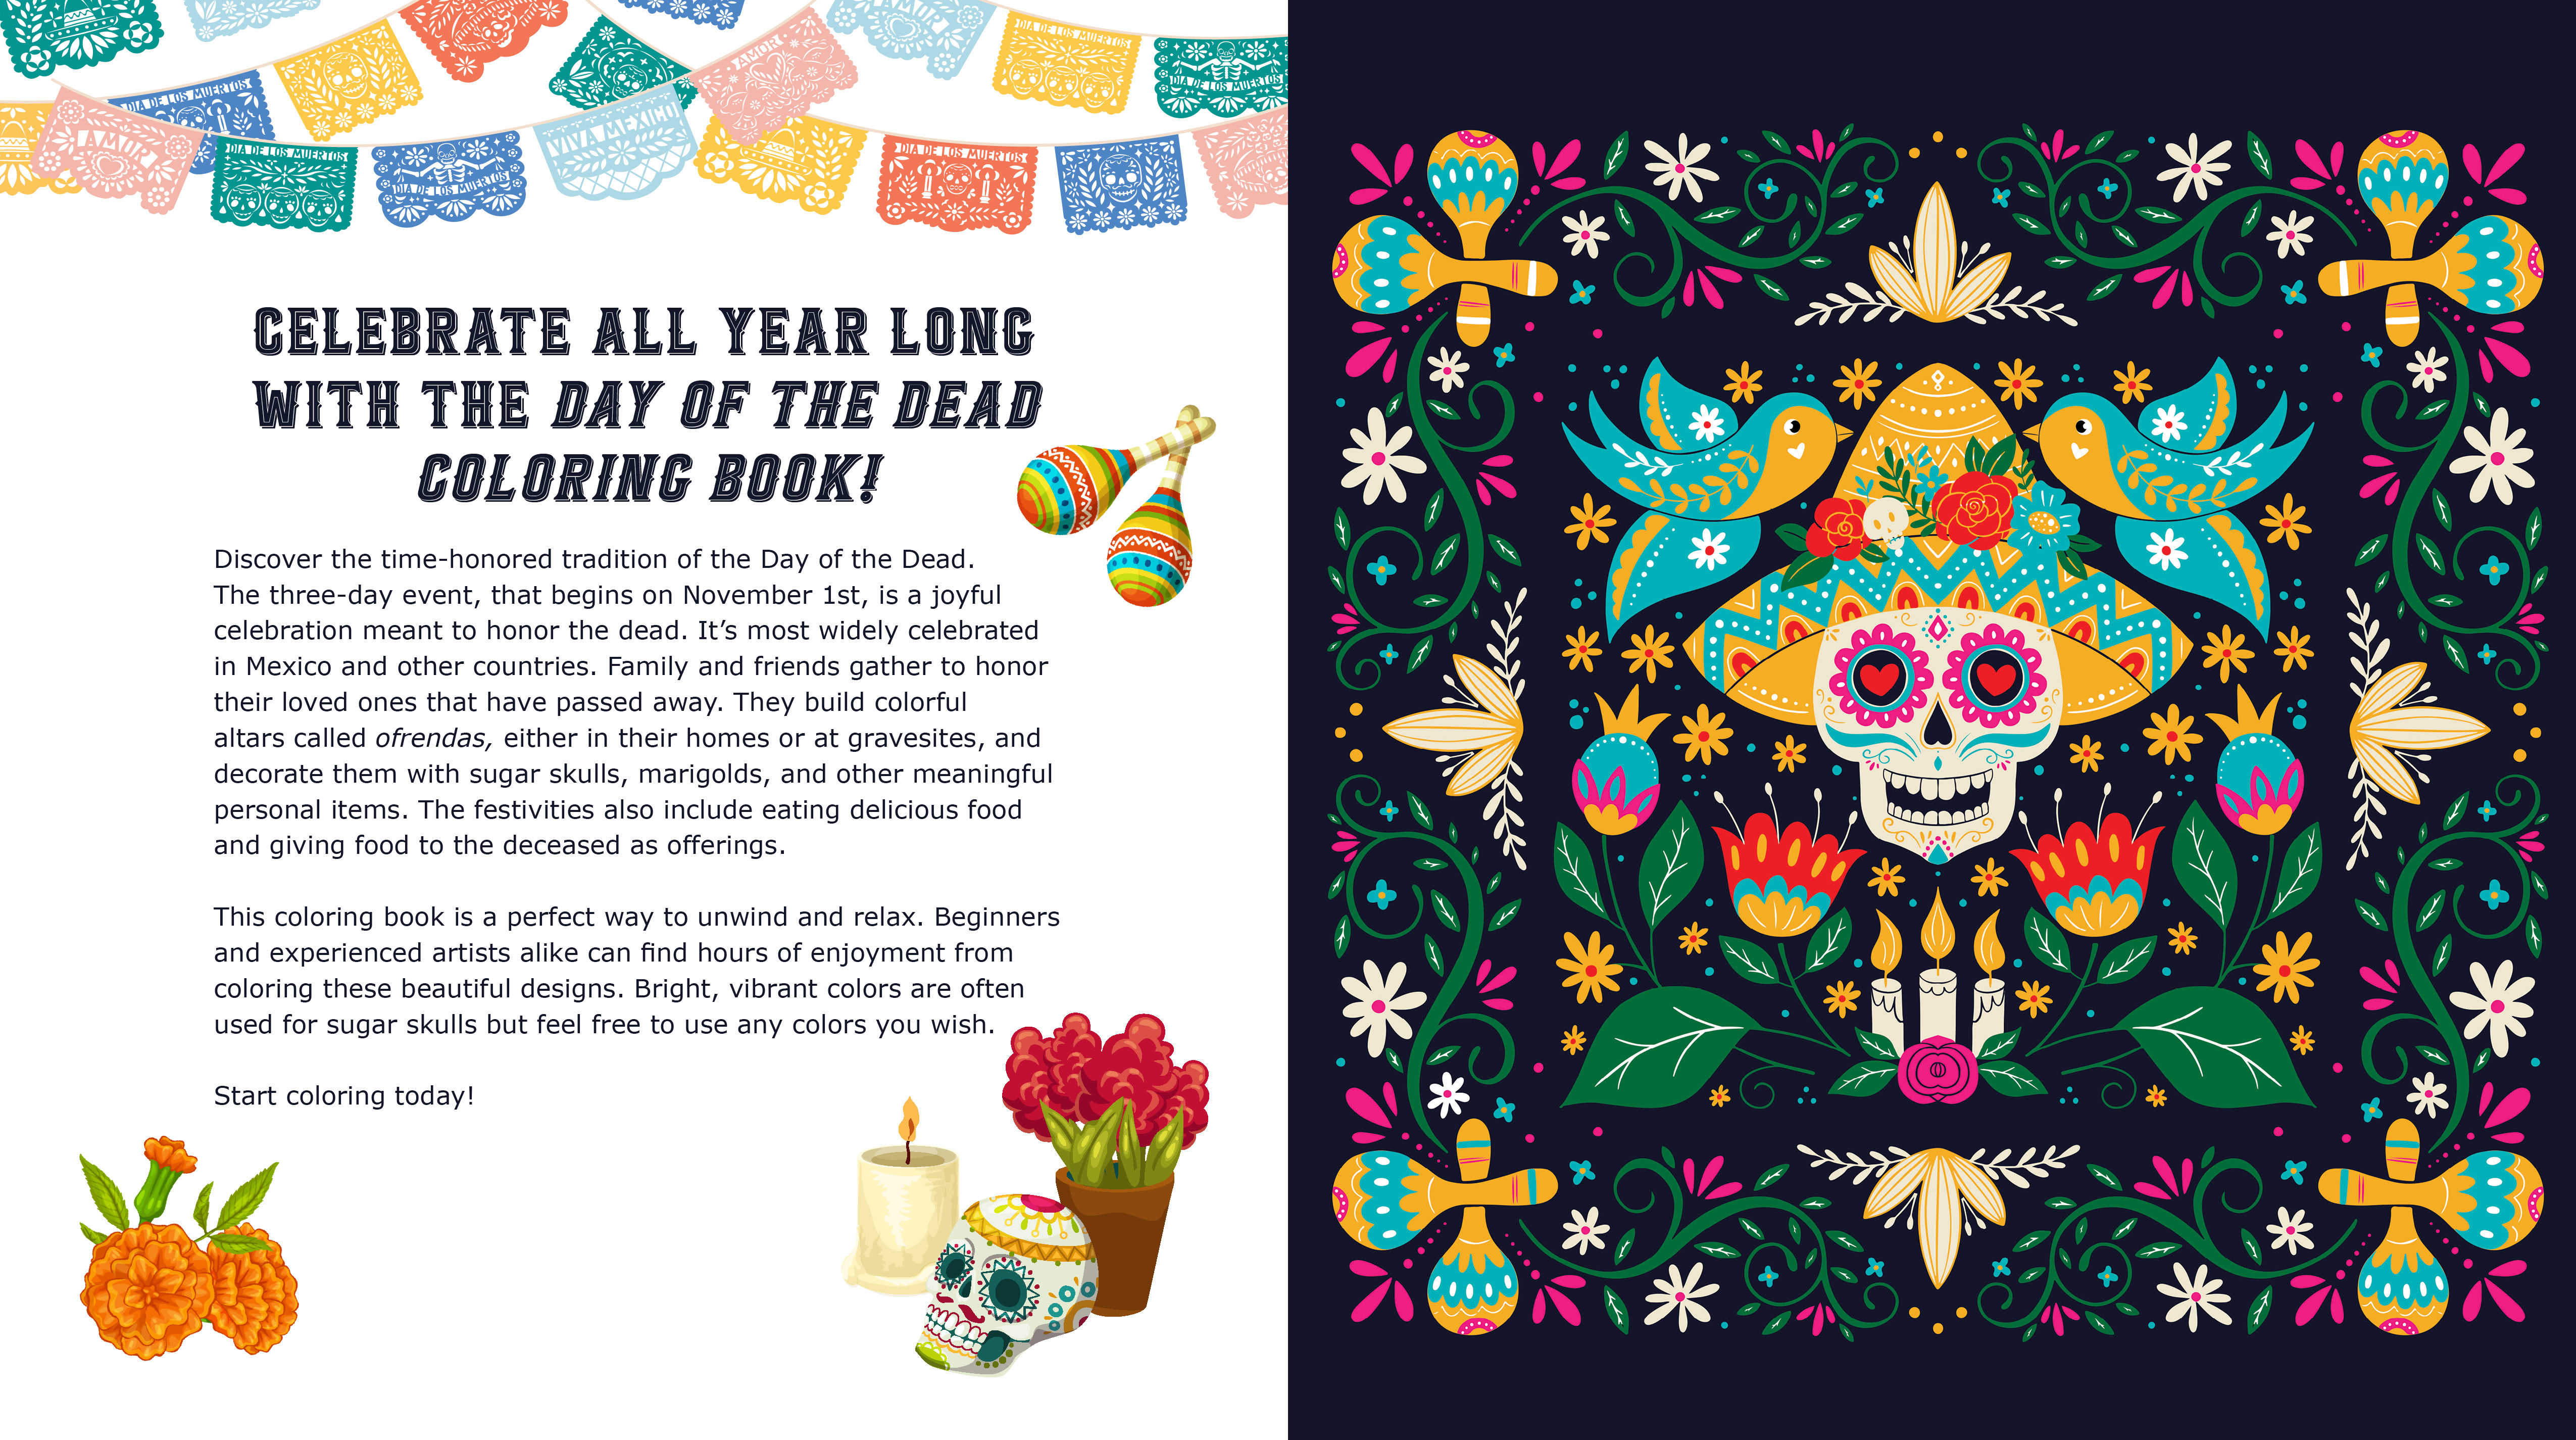 The Day of the Dead Coloring Book